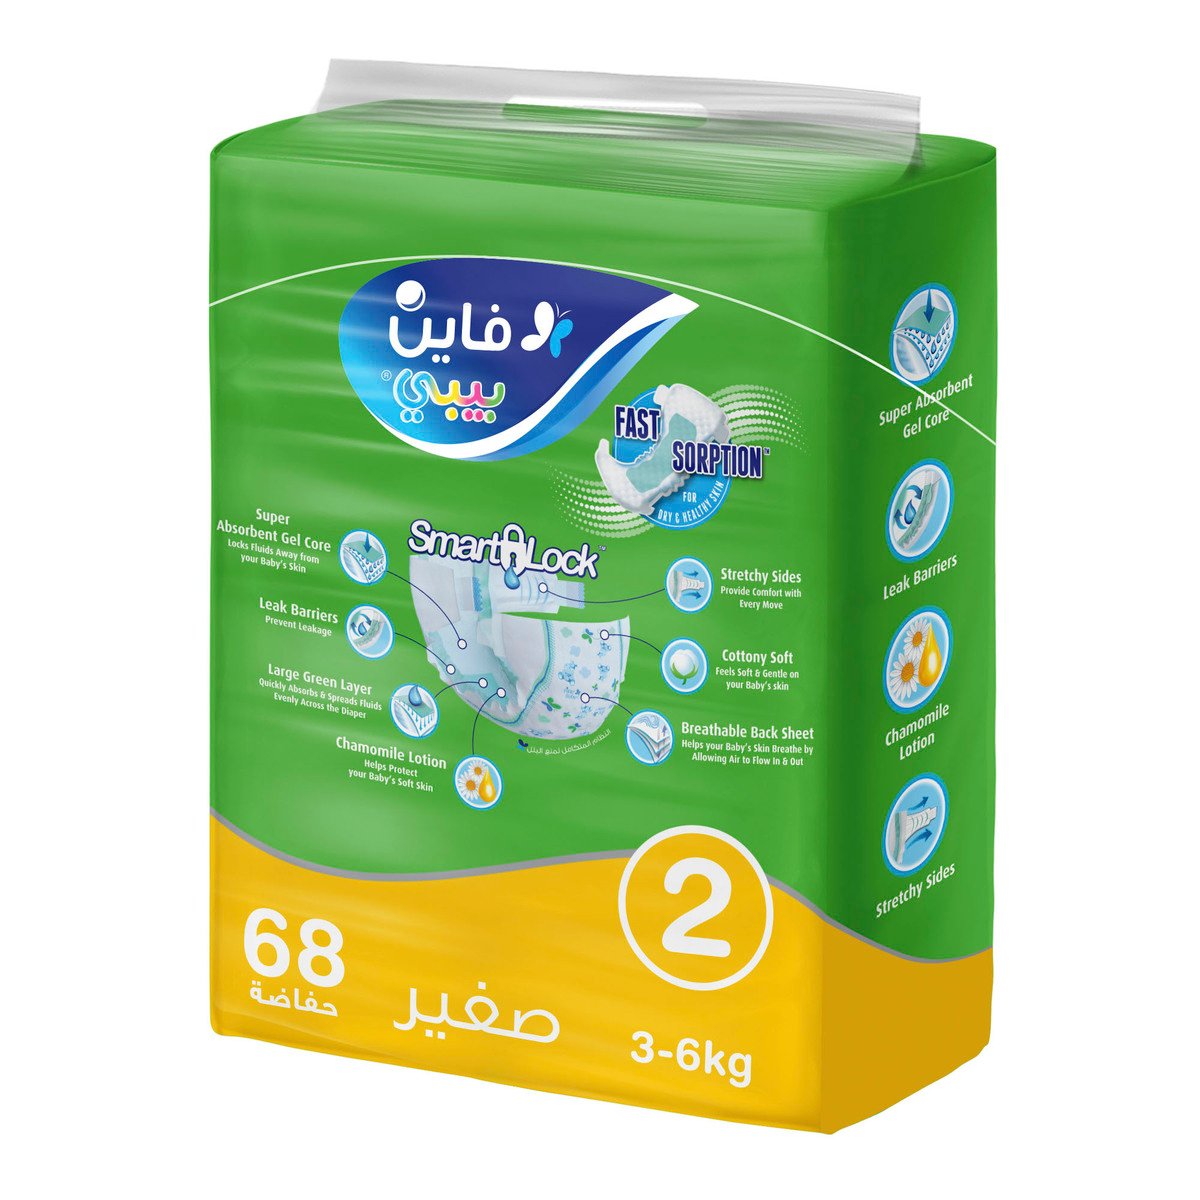 Fine Baby Diapers Size 2 Small 3-6 kg 68pcs